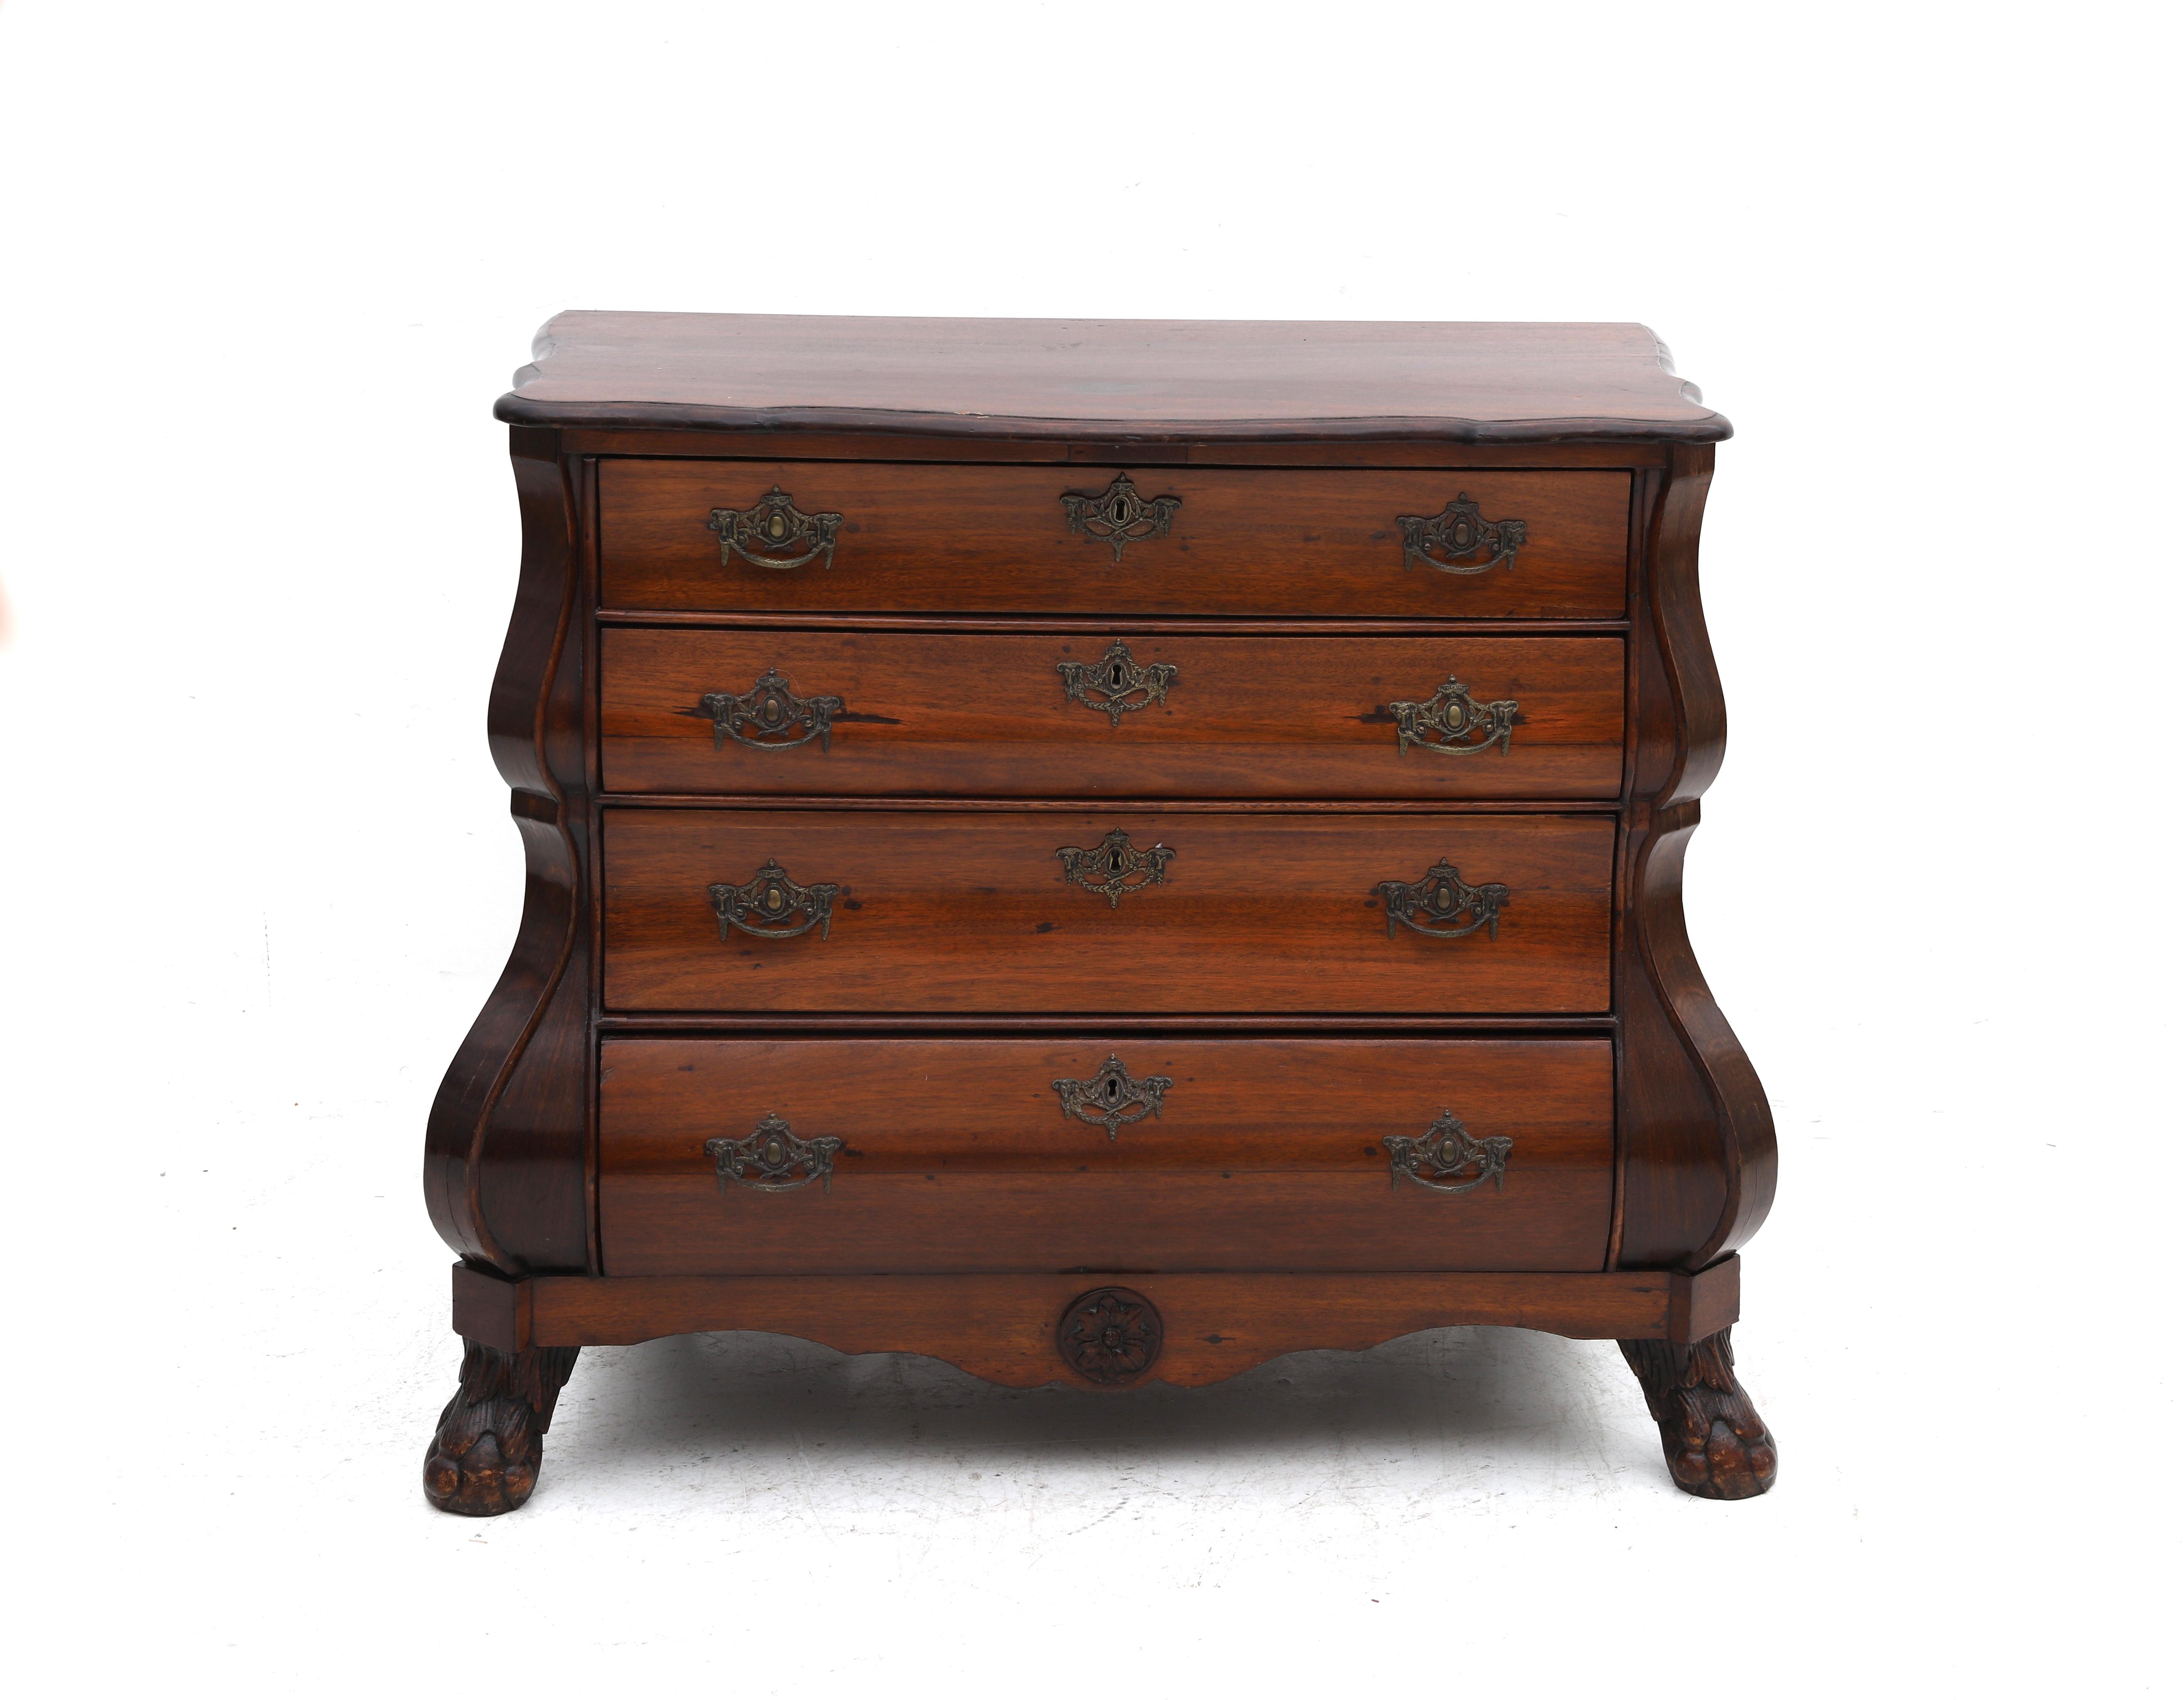 A Louis XV chest of drawers / commode, Dutch, 18th century. Under the scalloped top four drawers